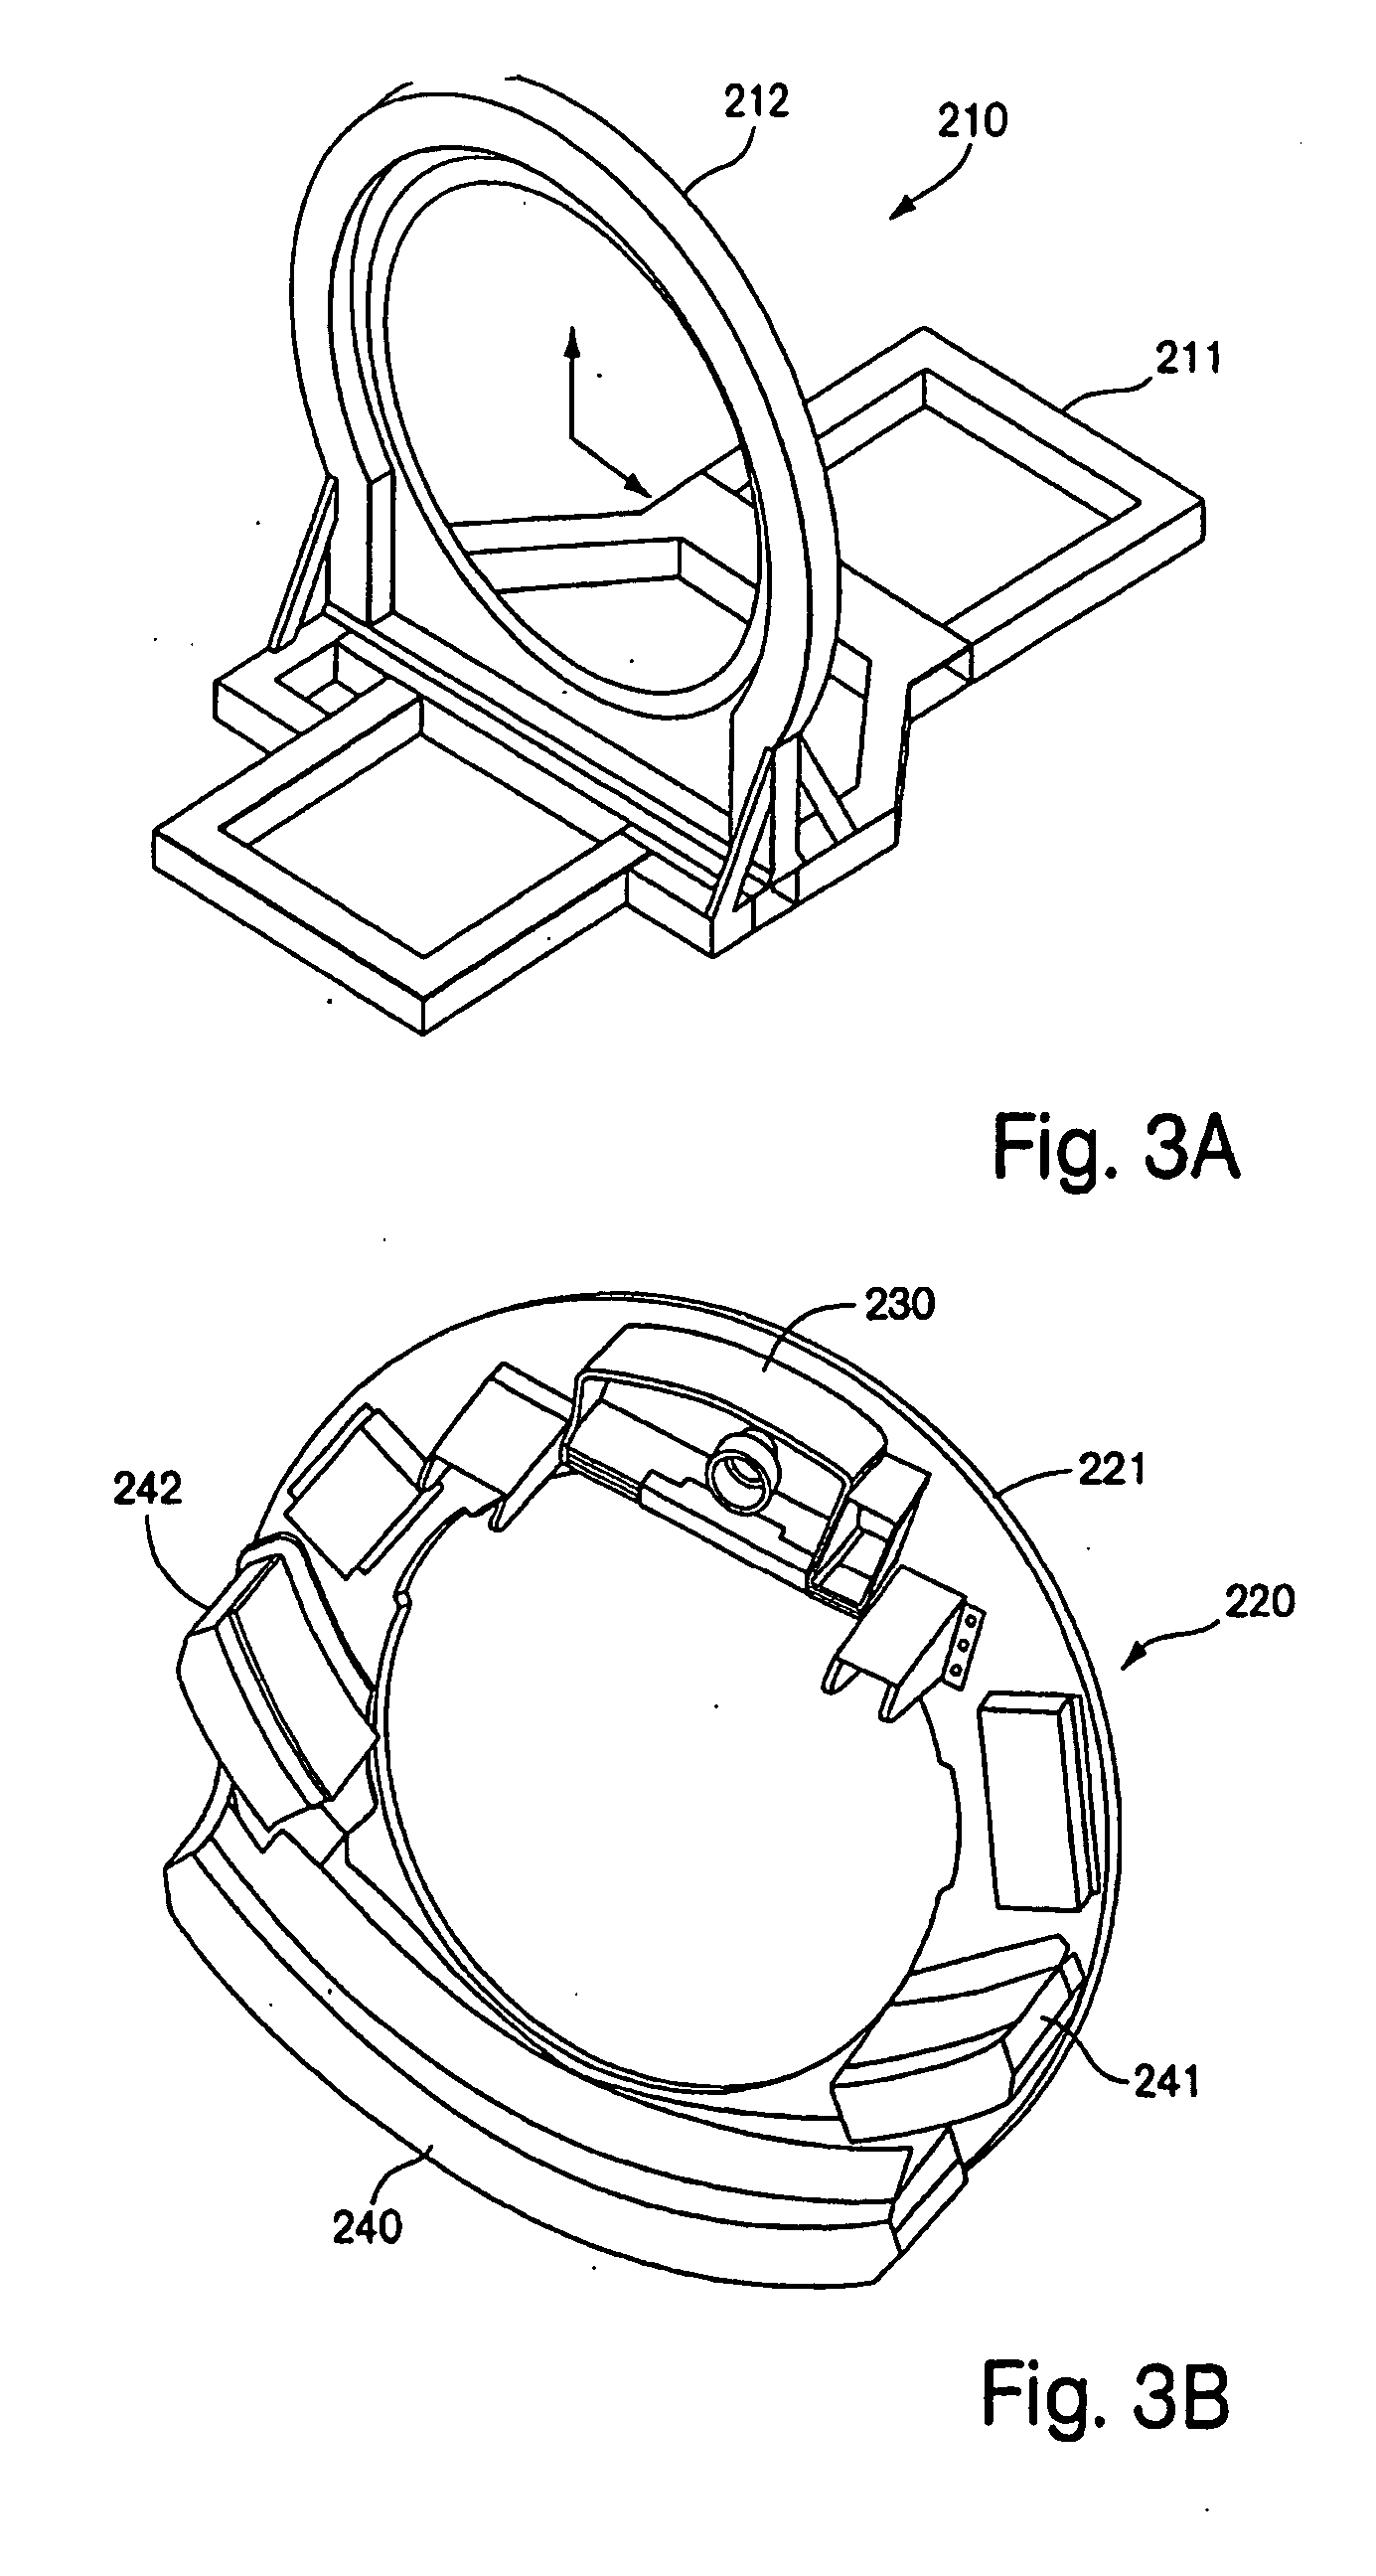 Folded array CT baggage scanner